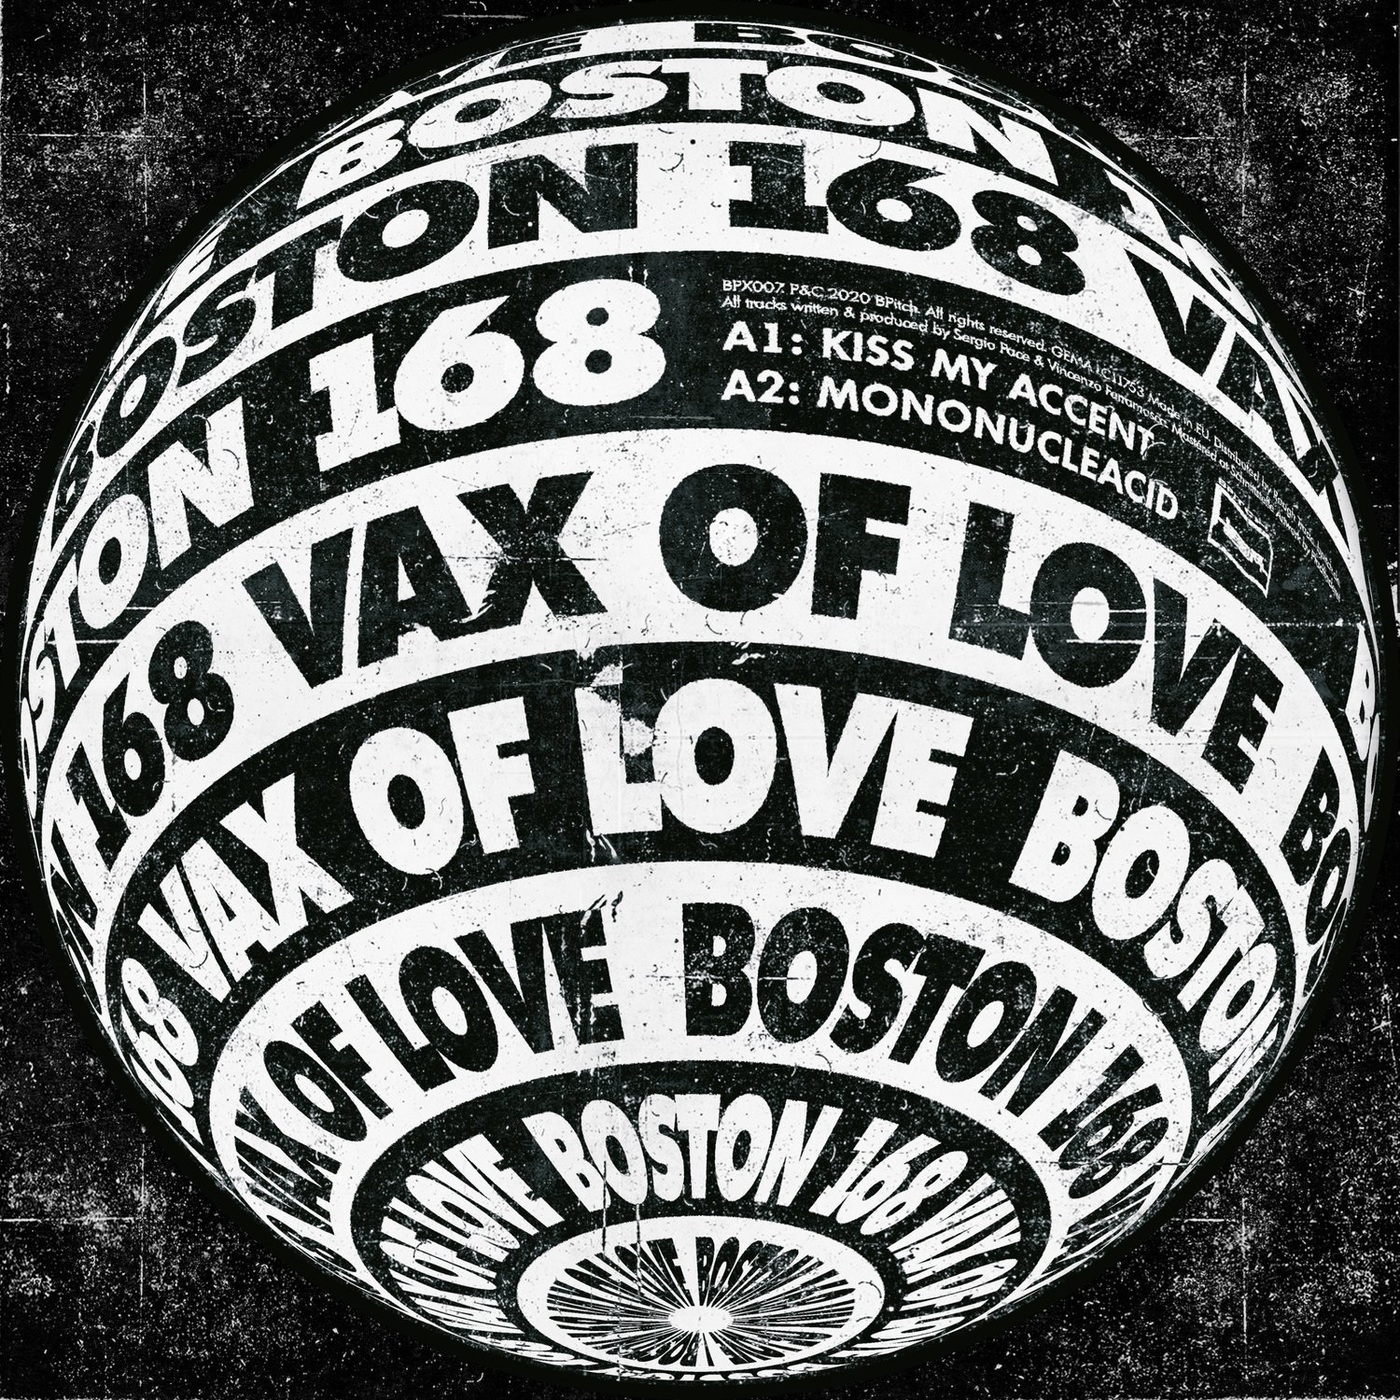 Download Vax Of Love on Electrobuzz